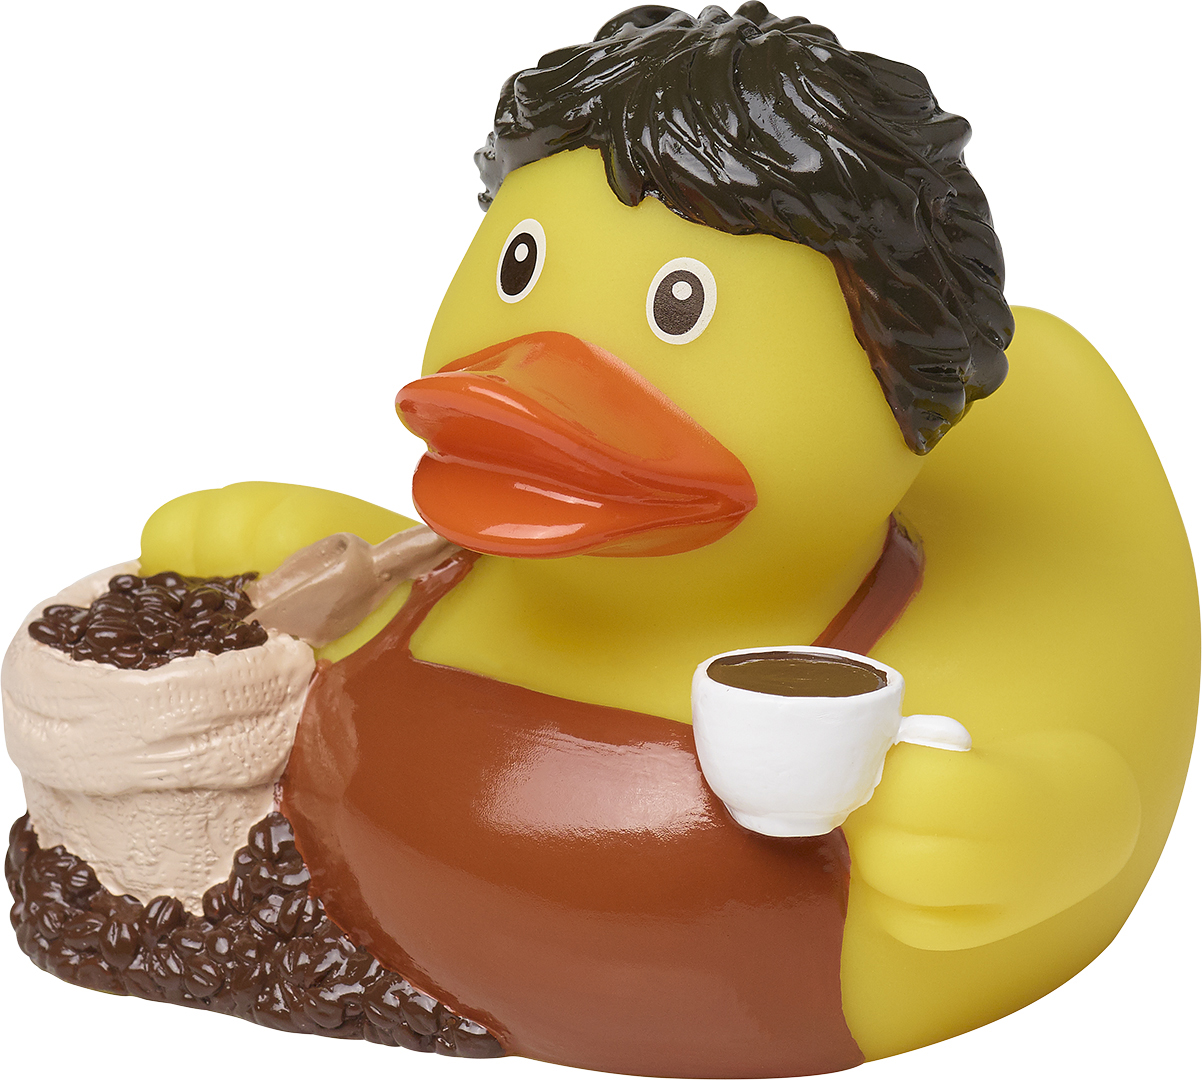 Squeaky duck, coffee